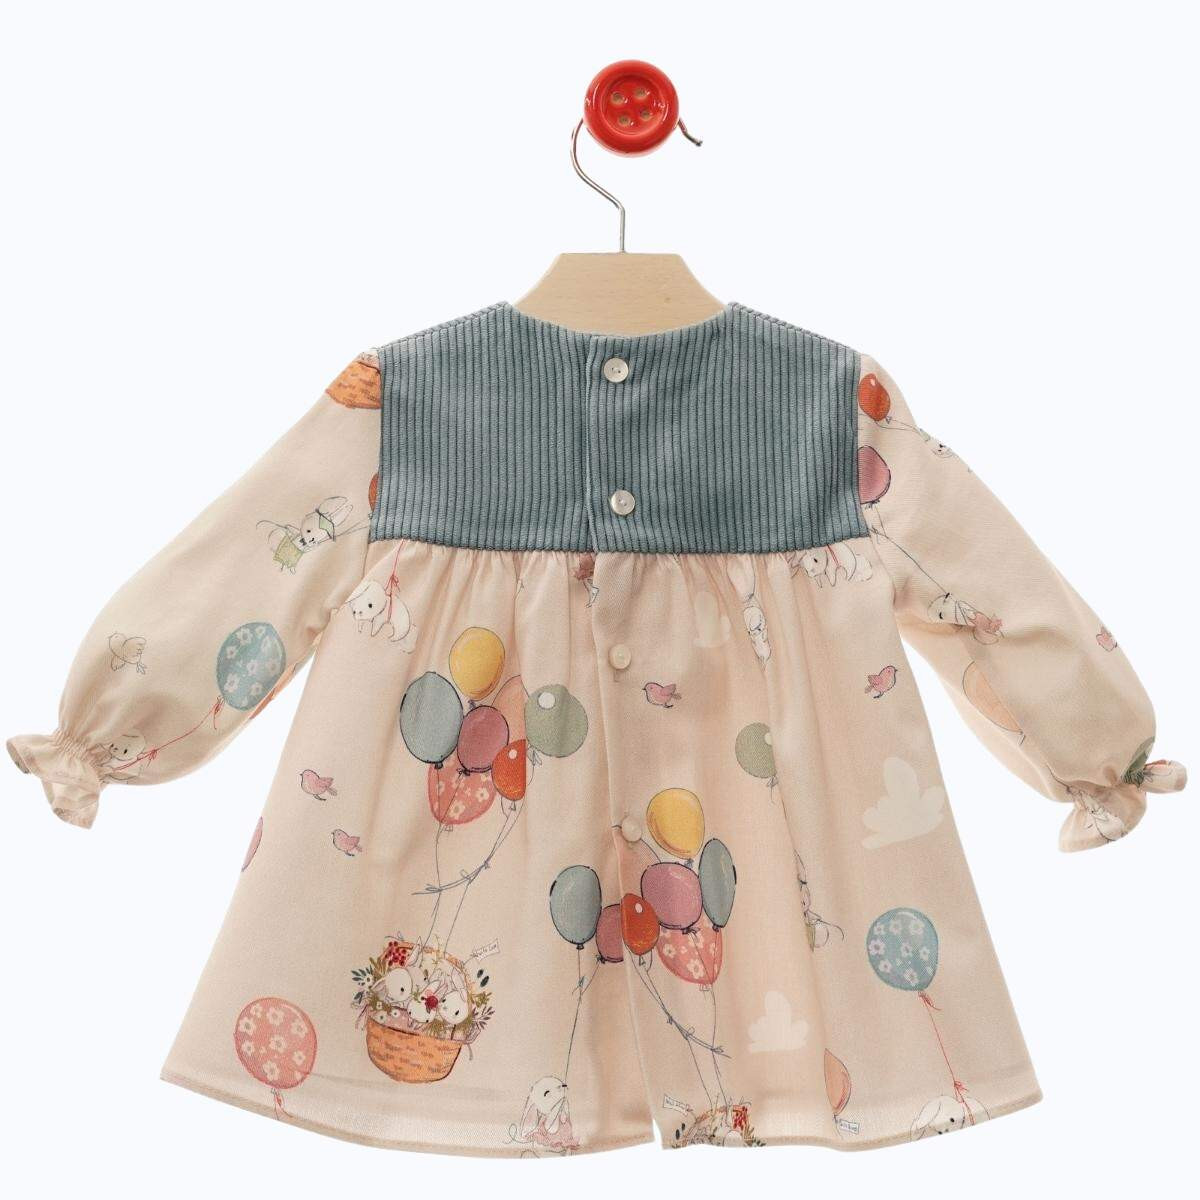 BALLOONS PRINTED DRESS WITH POMPOMS DELSUR - 3